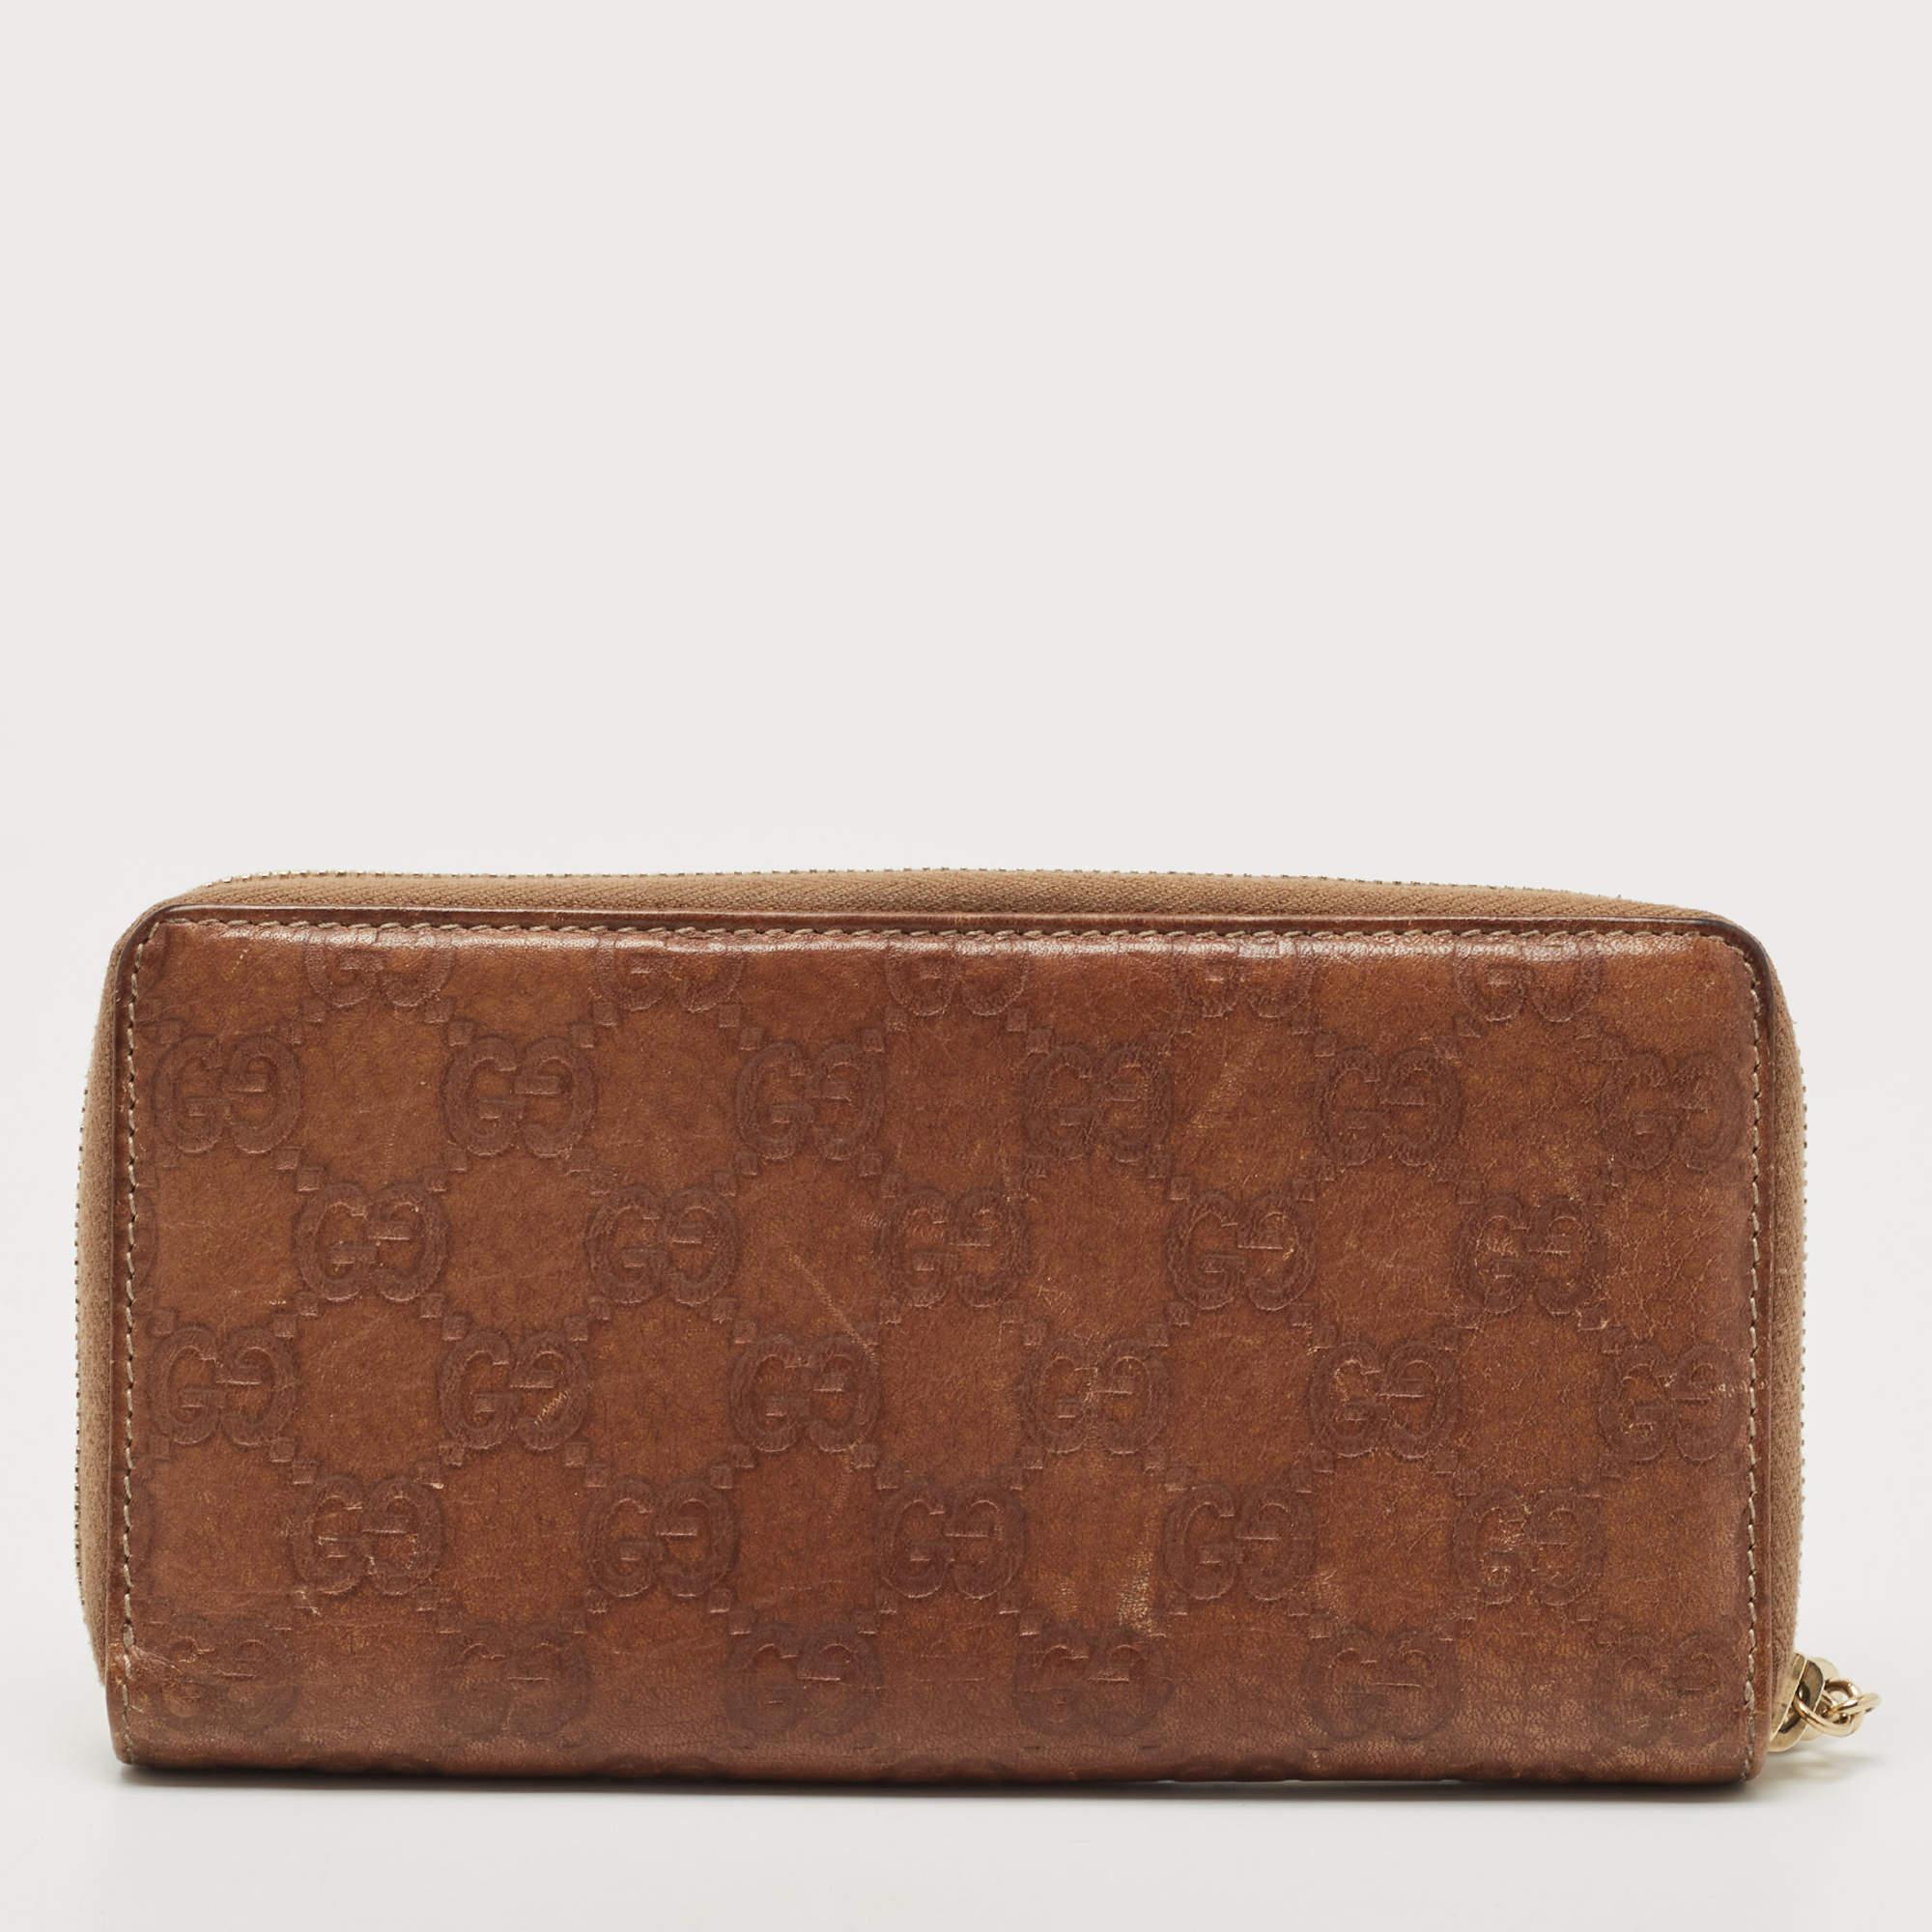 This Gucci wallet is an immaculate balance of sophistication and rational utility. It has been designed using prime quality materials and elevated by a bamboo tassel. The creation is equipped with ample space for your monetary essentials.

